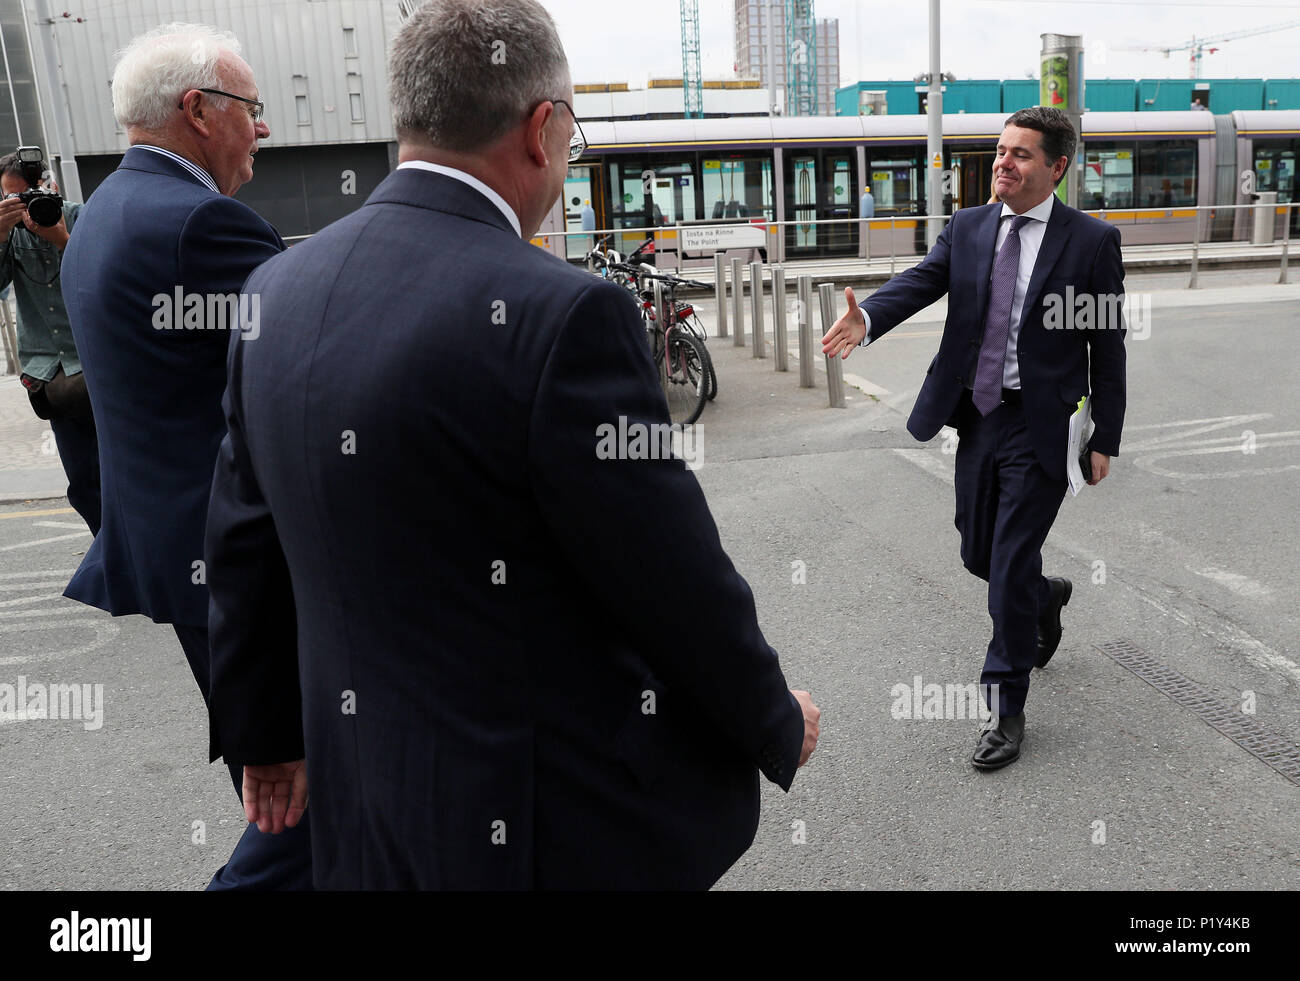 Minister for Finance Paschal Donohoe (right) is greeted by NAMA Chairman Frank Daly (left) and NAMA Chief Executive Brendan McDonagh on arrival at the Gibson Hotel, Dublin, for the launch of the NAMA Annual Report and Financial Statements for 2017. Stock Photo